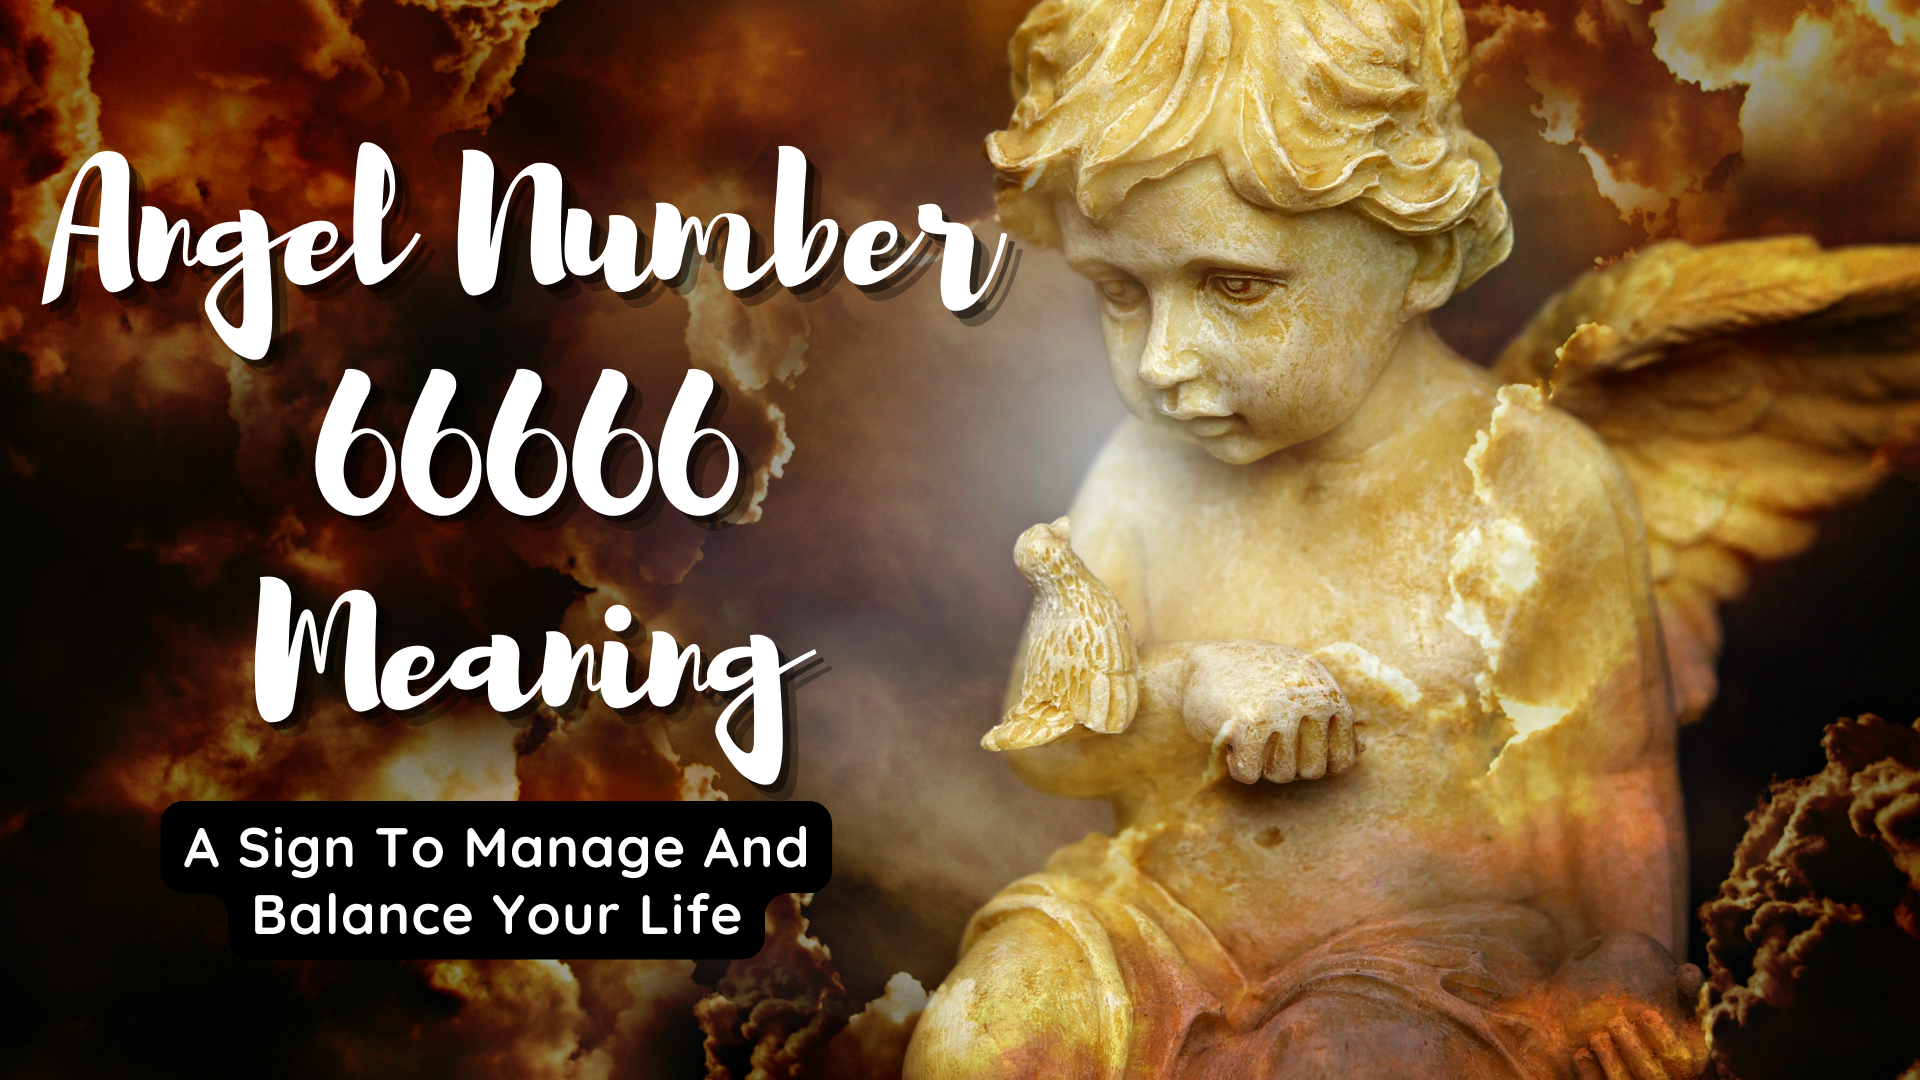 Angel Number 66666 Meaning - A Sign To Manage And Balance Your Life